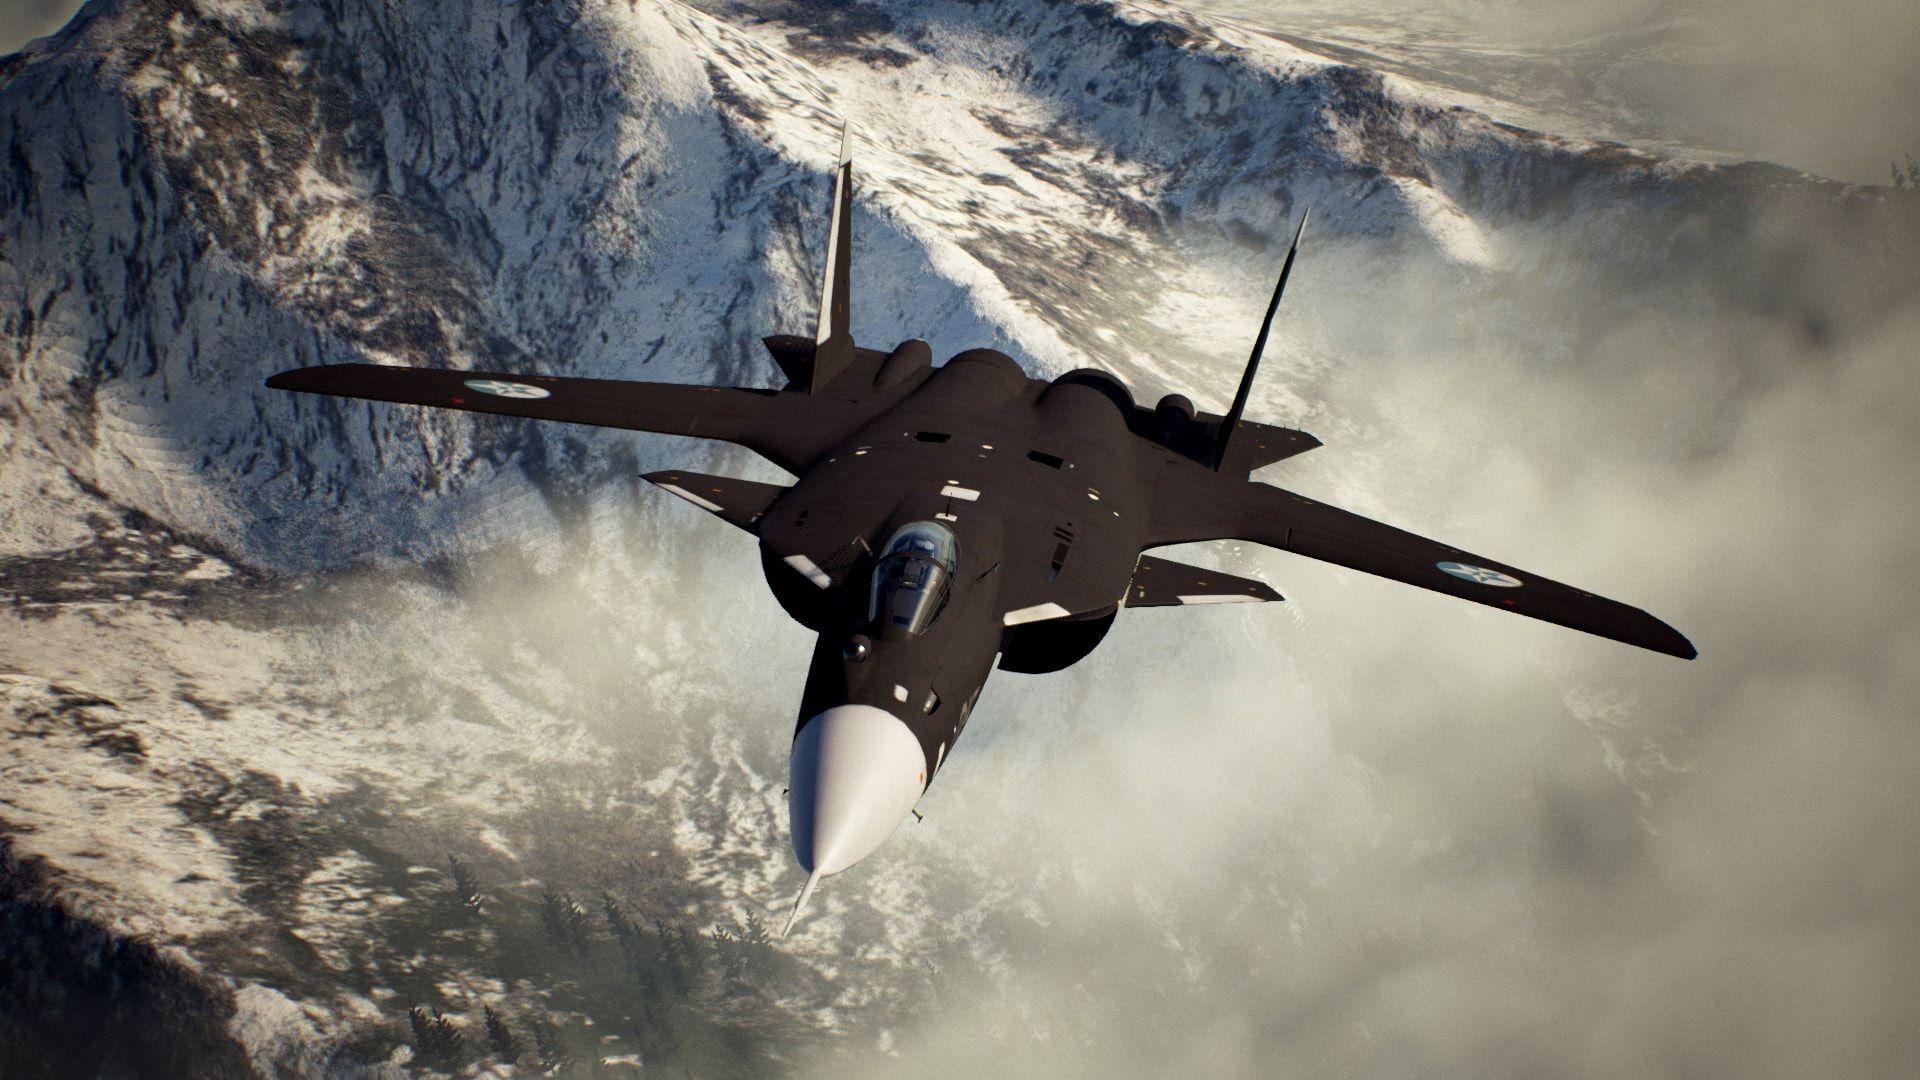 Ace combat 7: Skies Unknown release date announced for PC